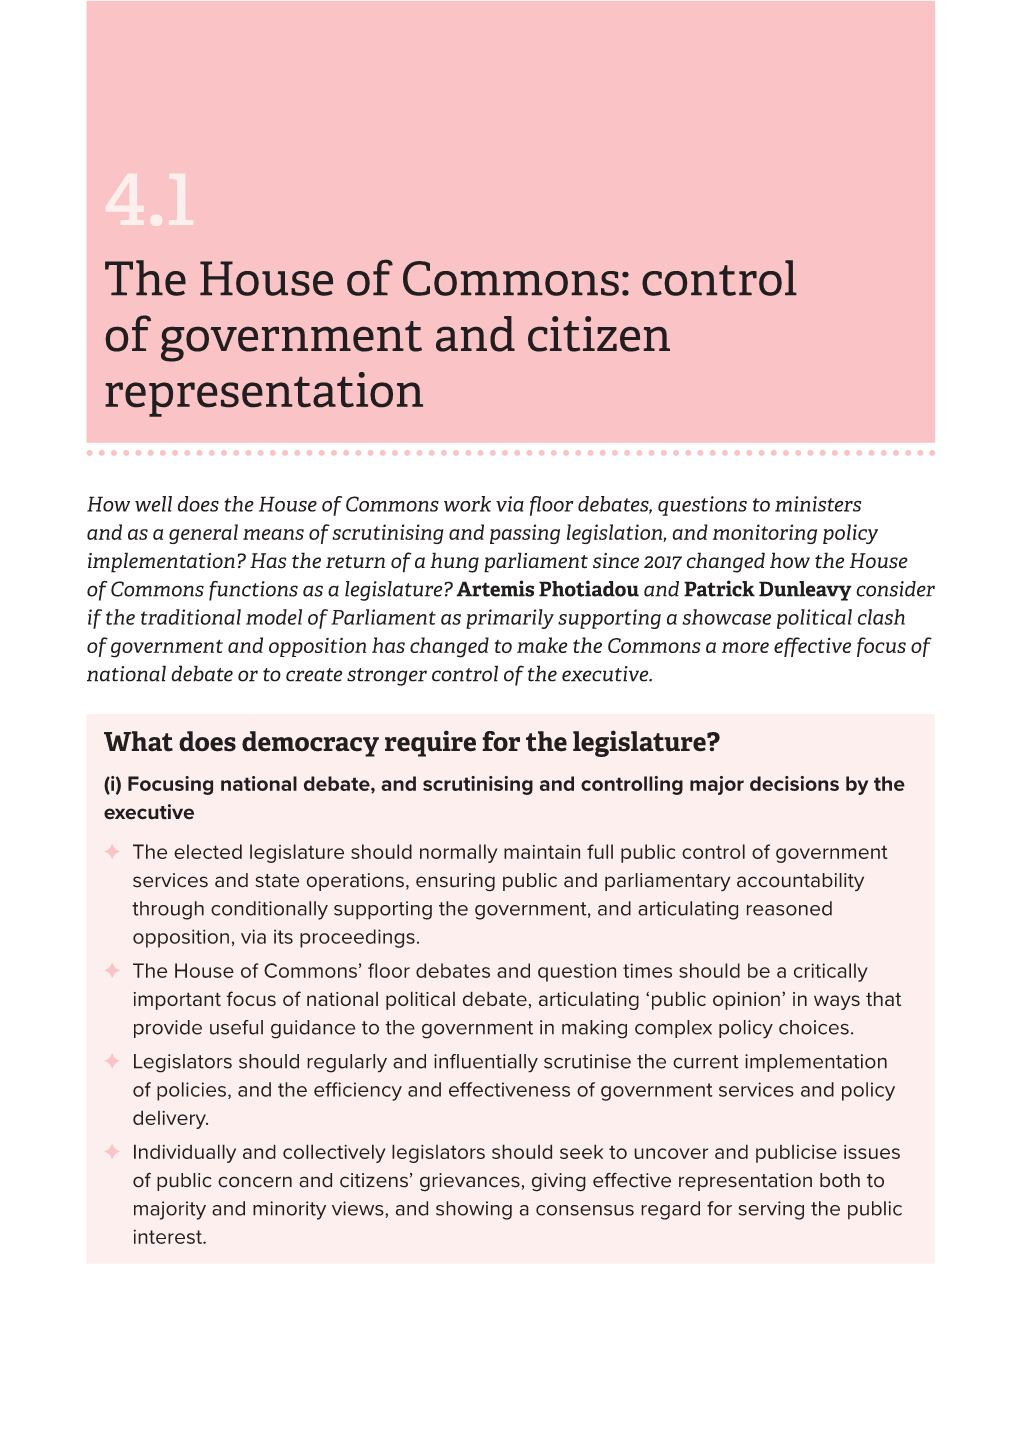 4.1 the House of Commons: Control of Government and Citizen Representation